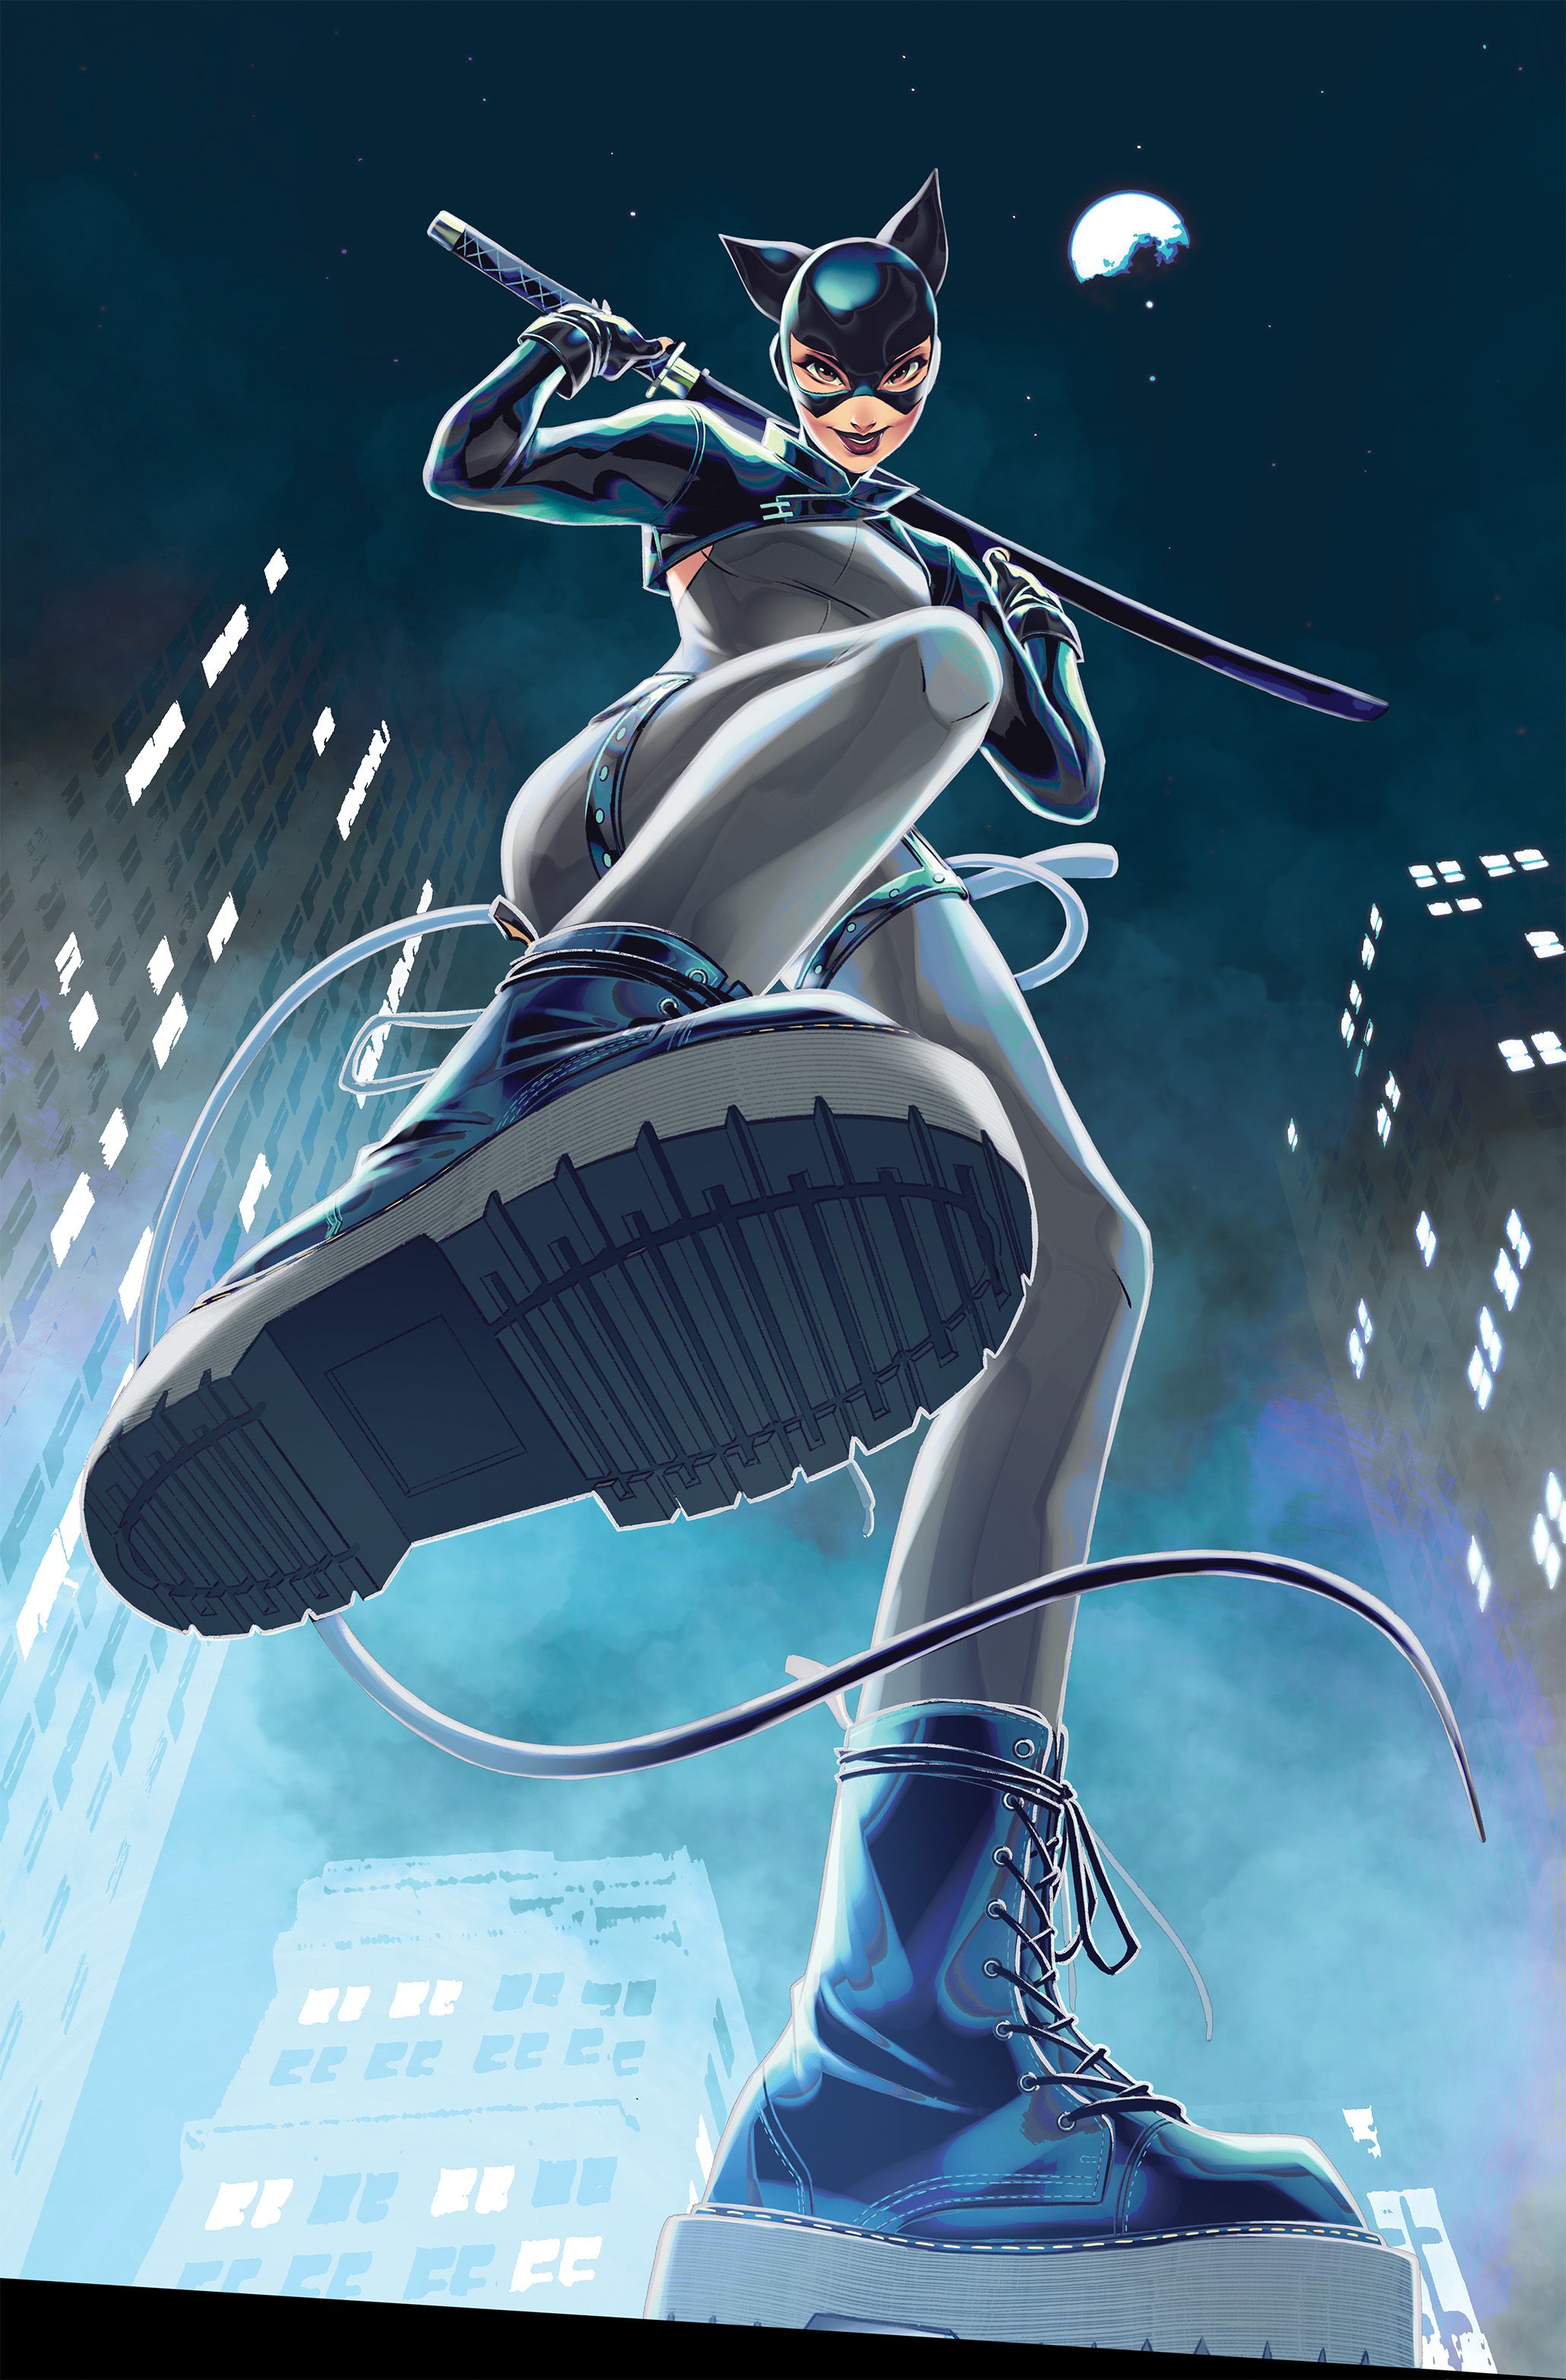 Catwoman 54 Open to Order Variant (Boo)